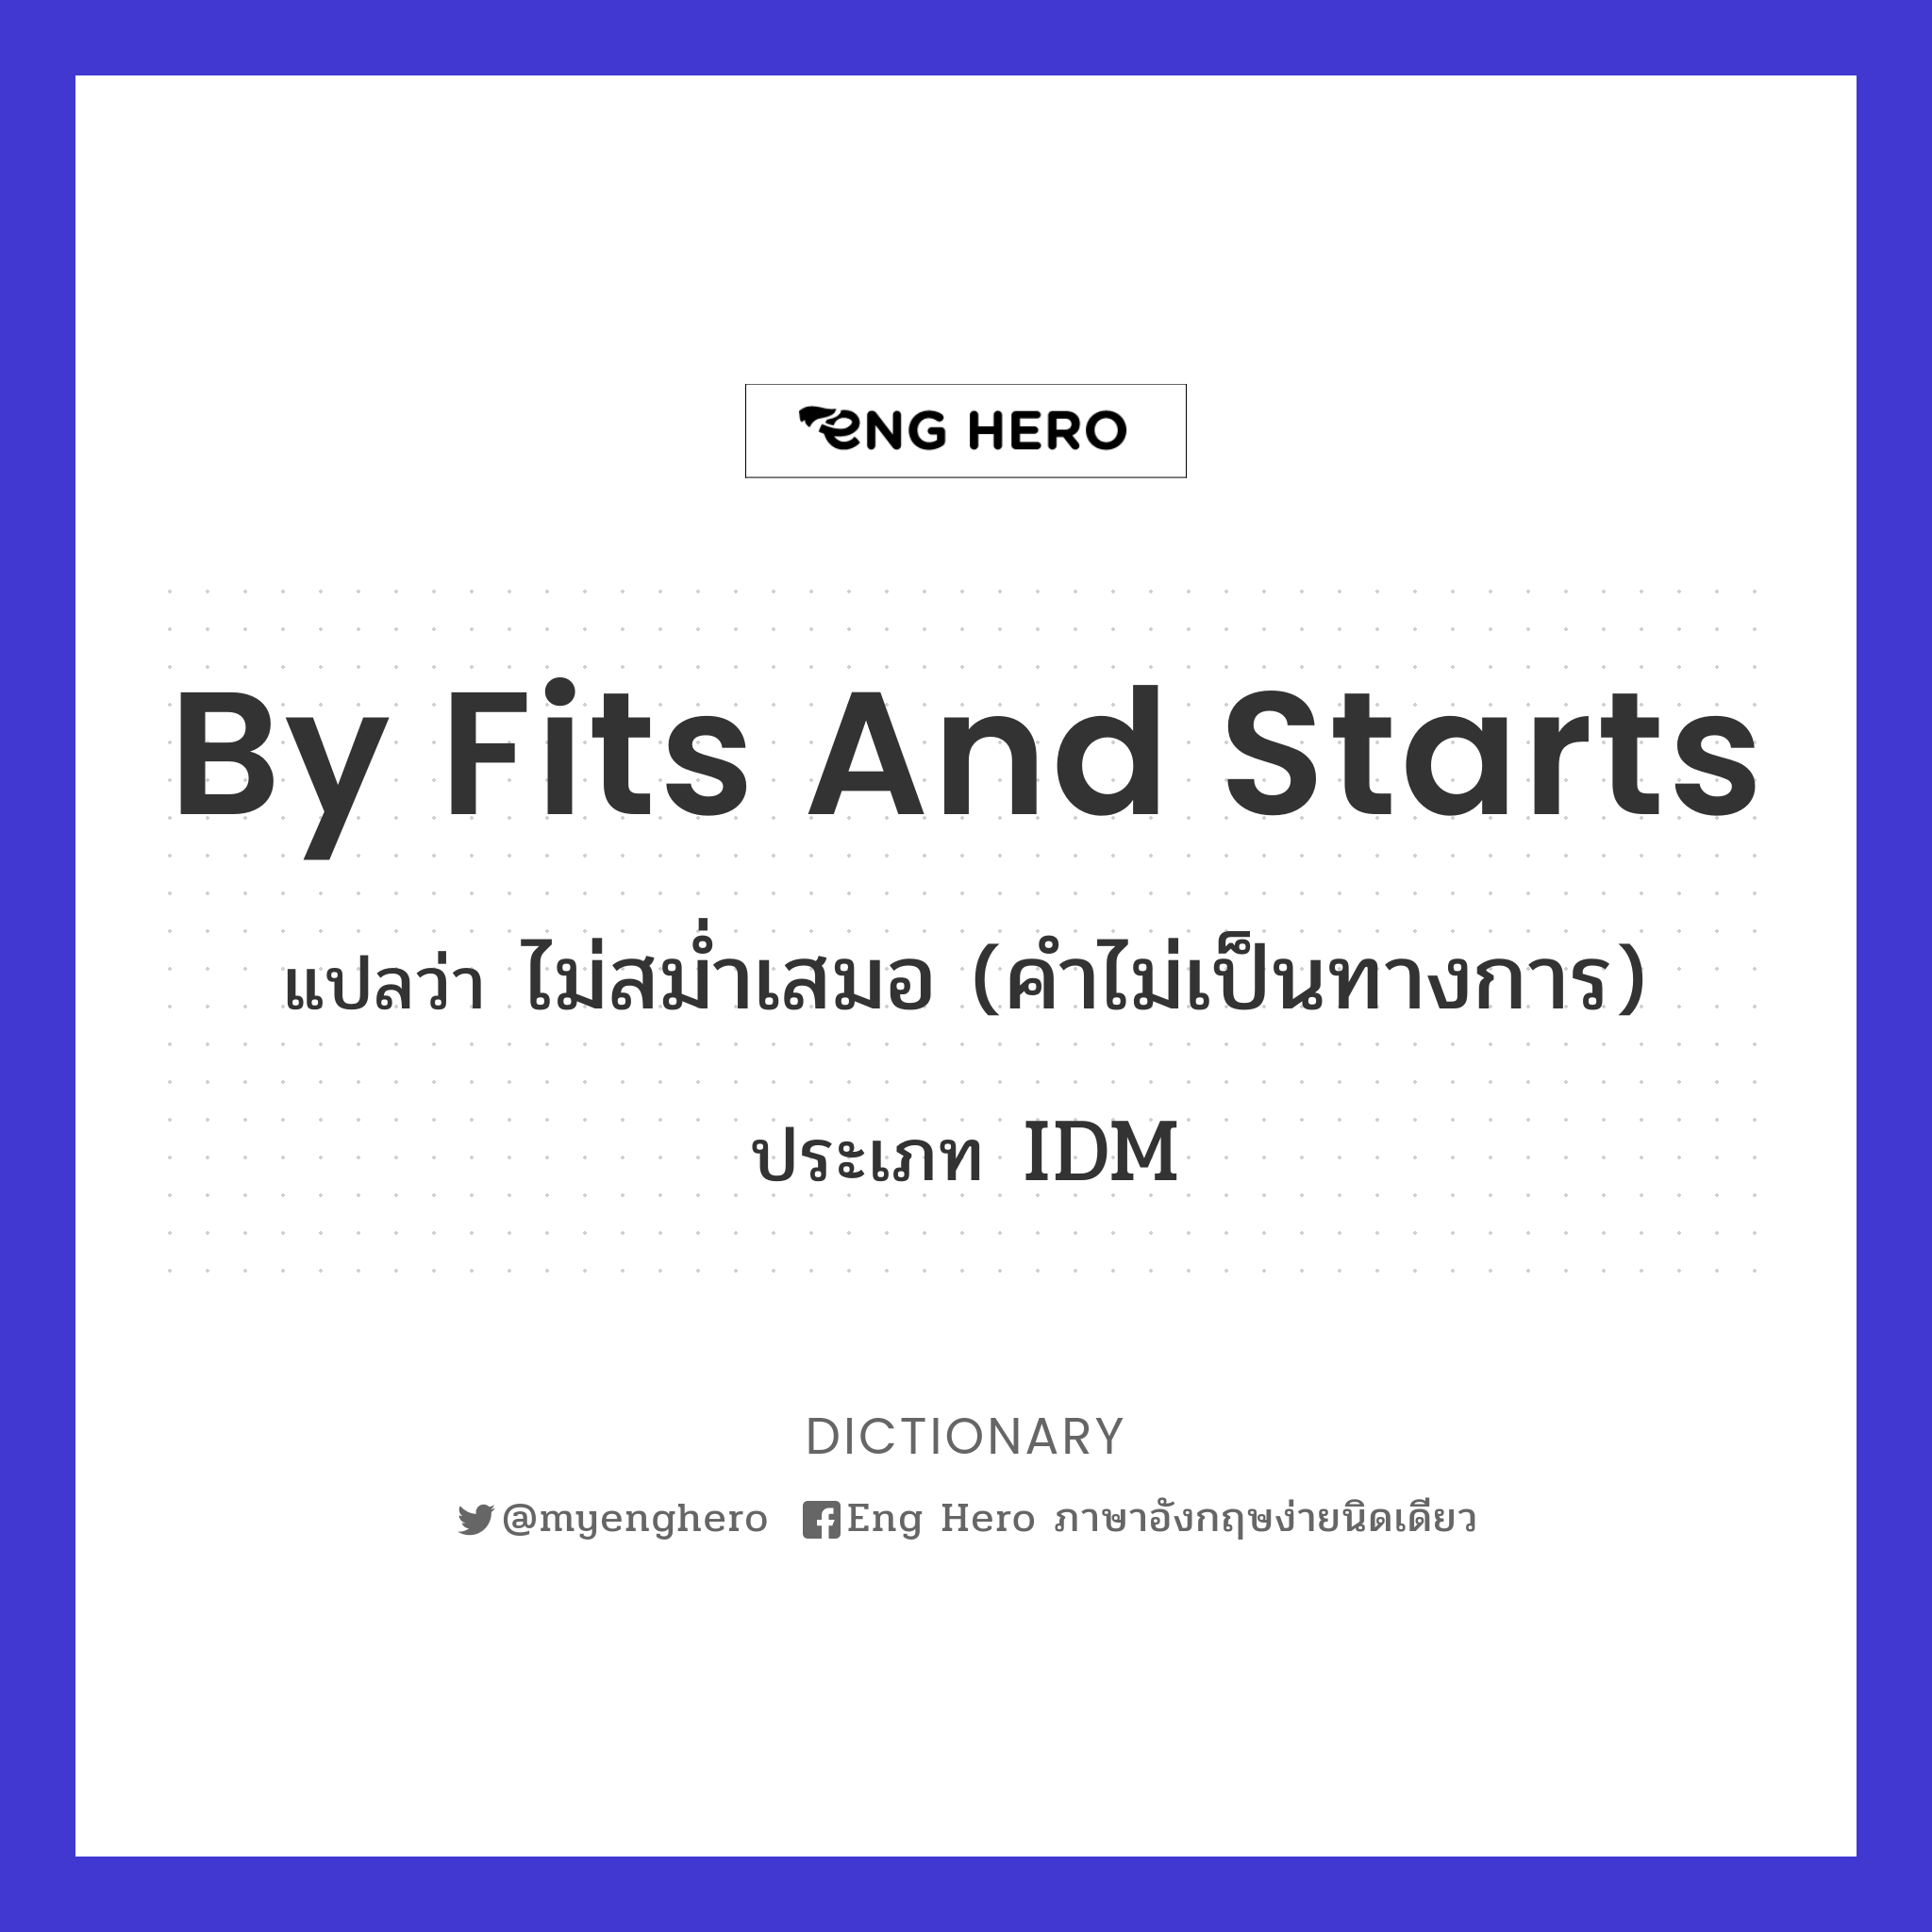 by fits and starts